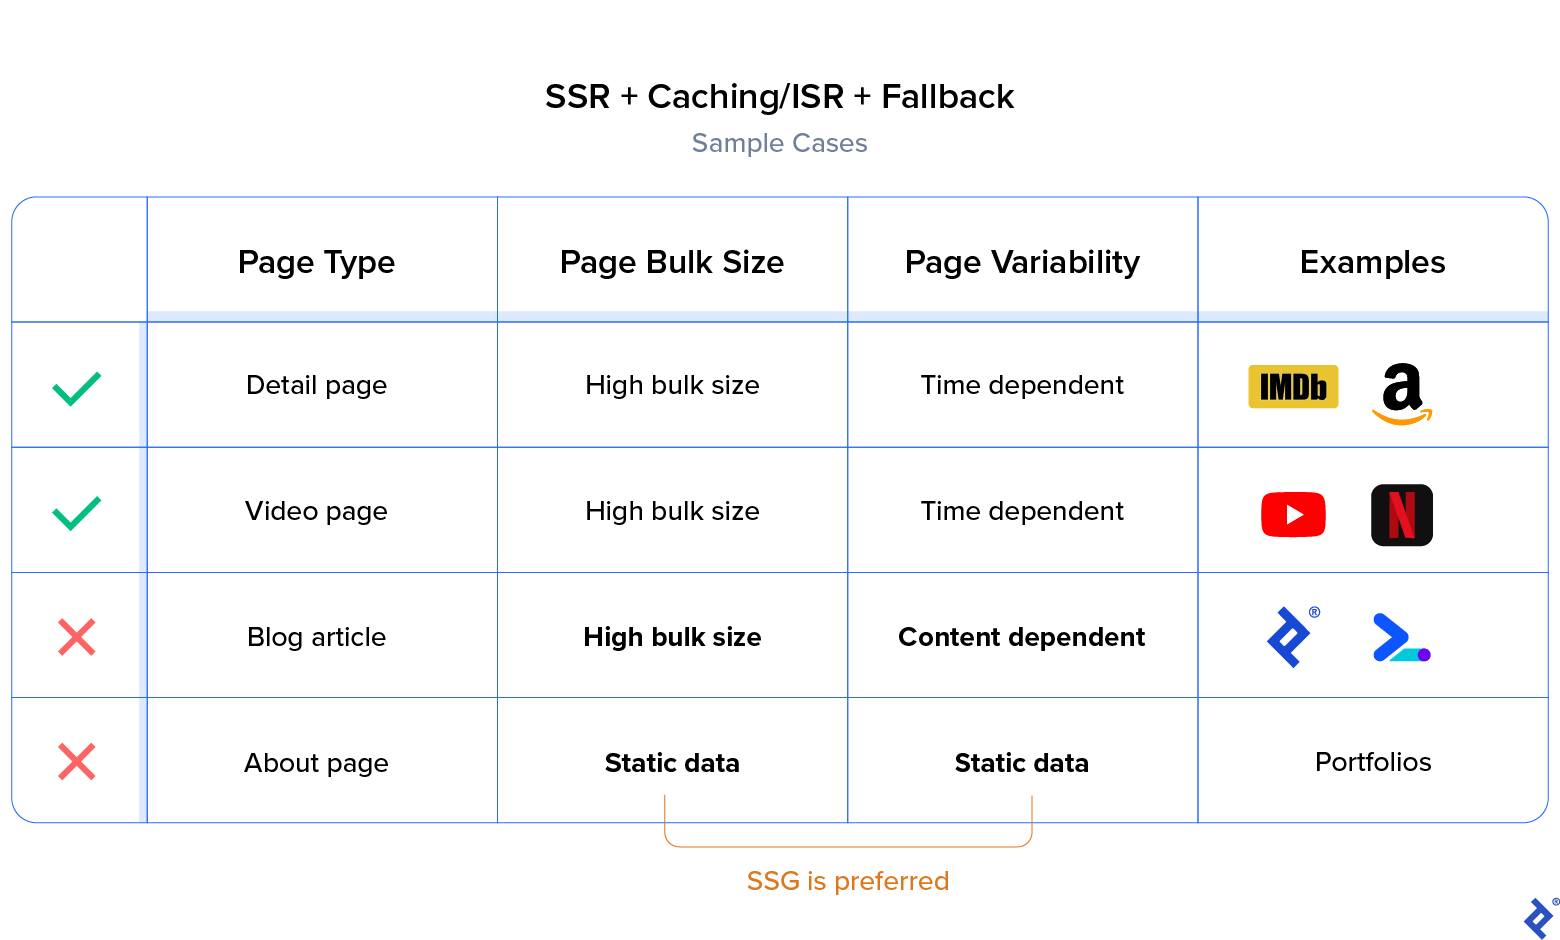 Sample cases of SSR plus caching and ISR plus fallback by page type, bulk size, and variability, including IMDB, YouTube, and Toptal.